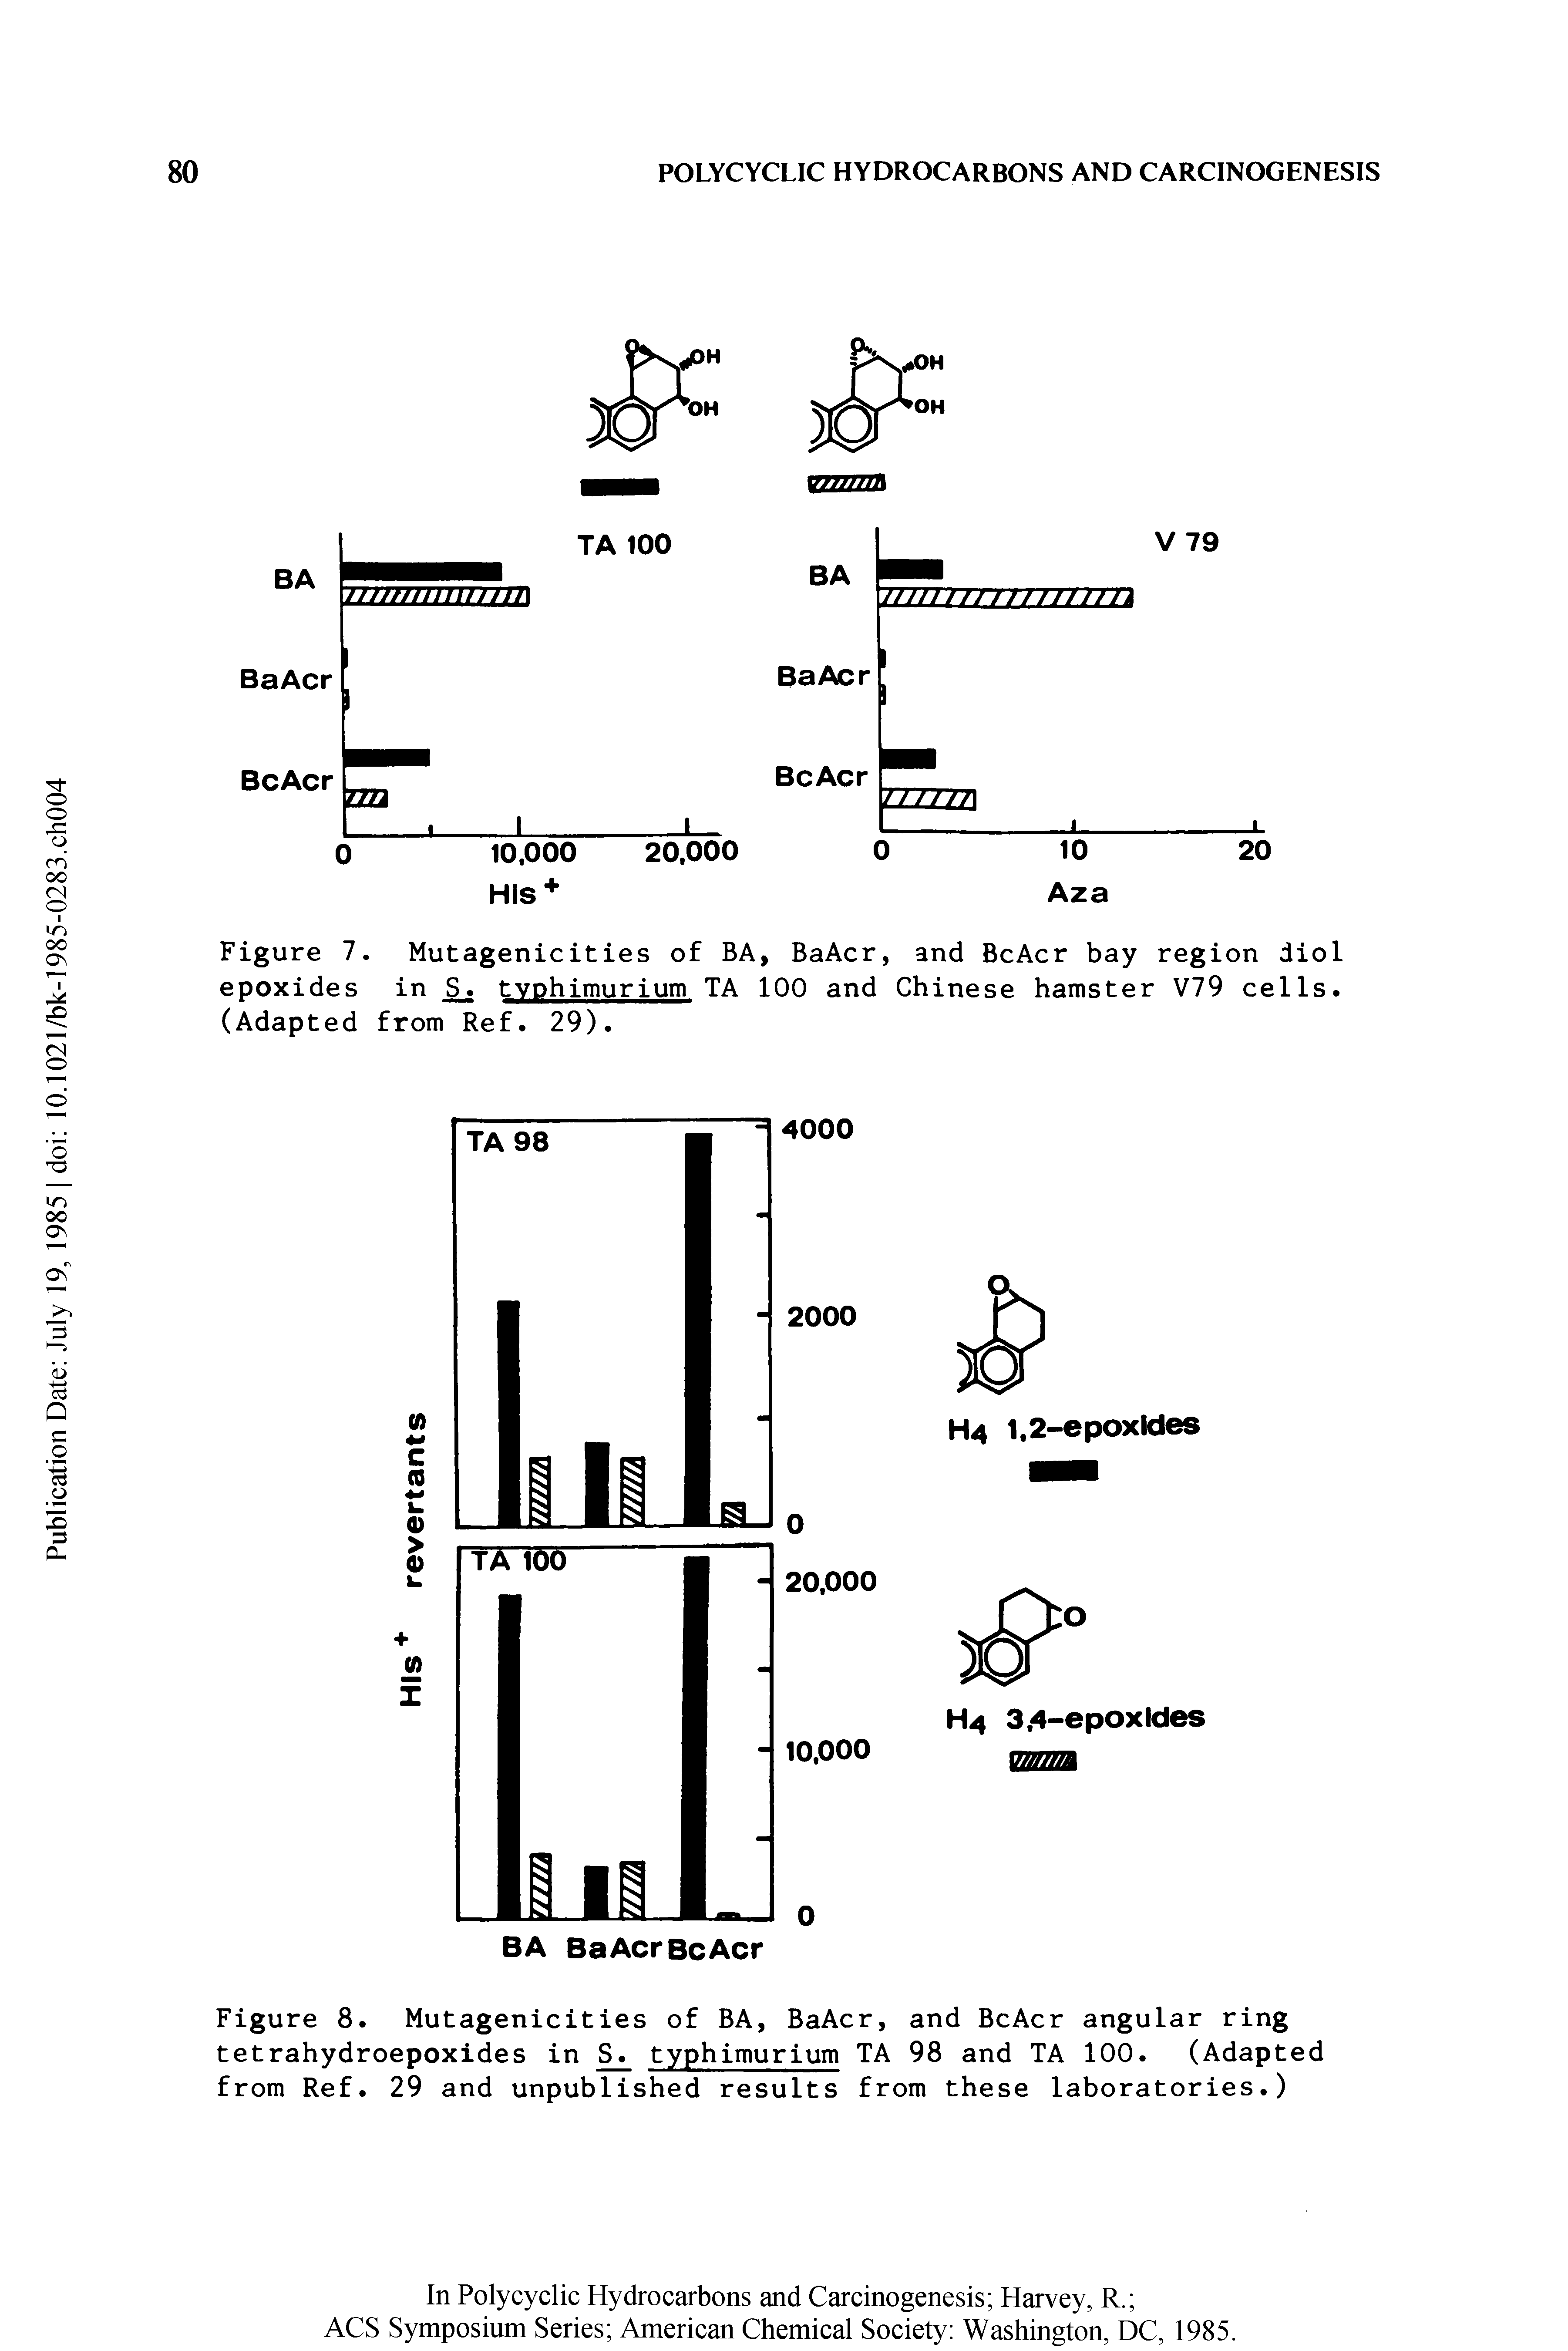 Figure 7. Mutagenicities of BA, BaAcr, and BcAcr bay region diol epoxides in S. typhimurium TA 100 and Chinese hamster V79 cells. (Adapted from Ref. 29).